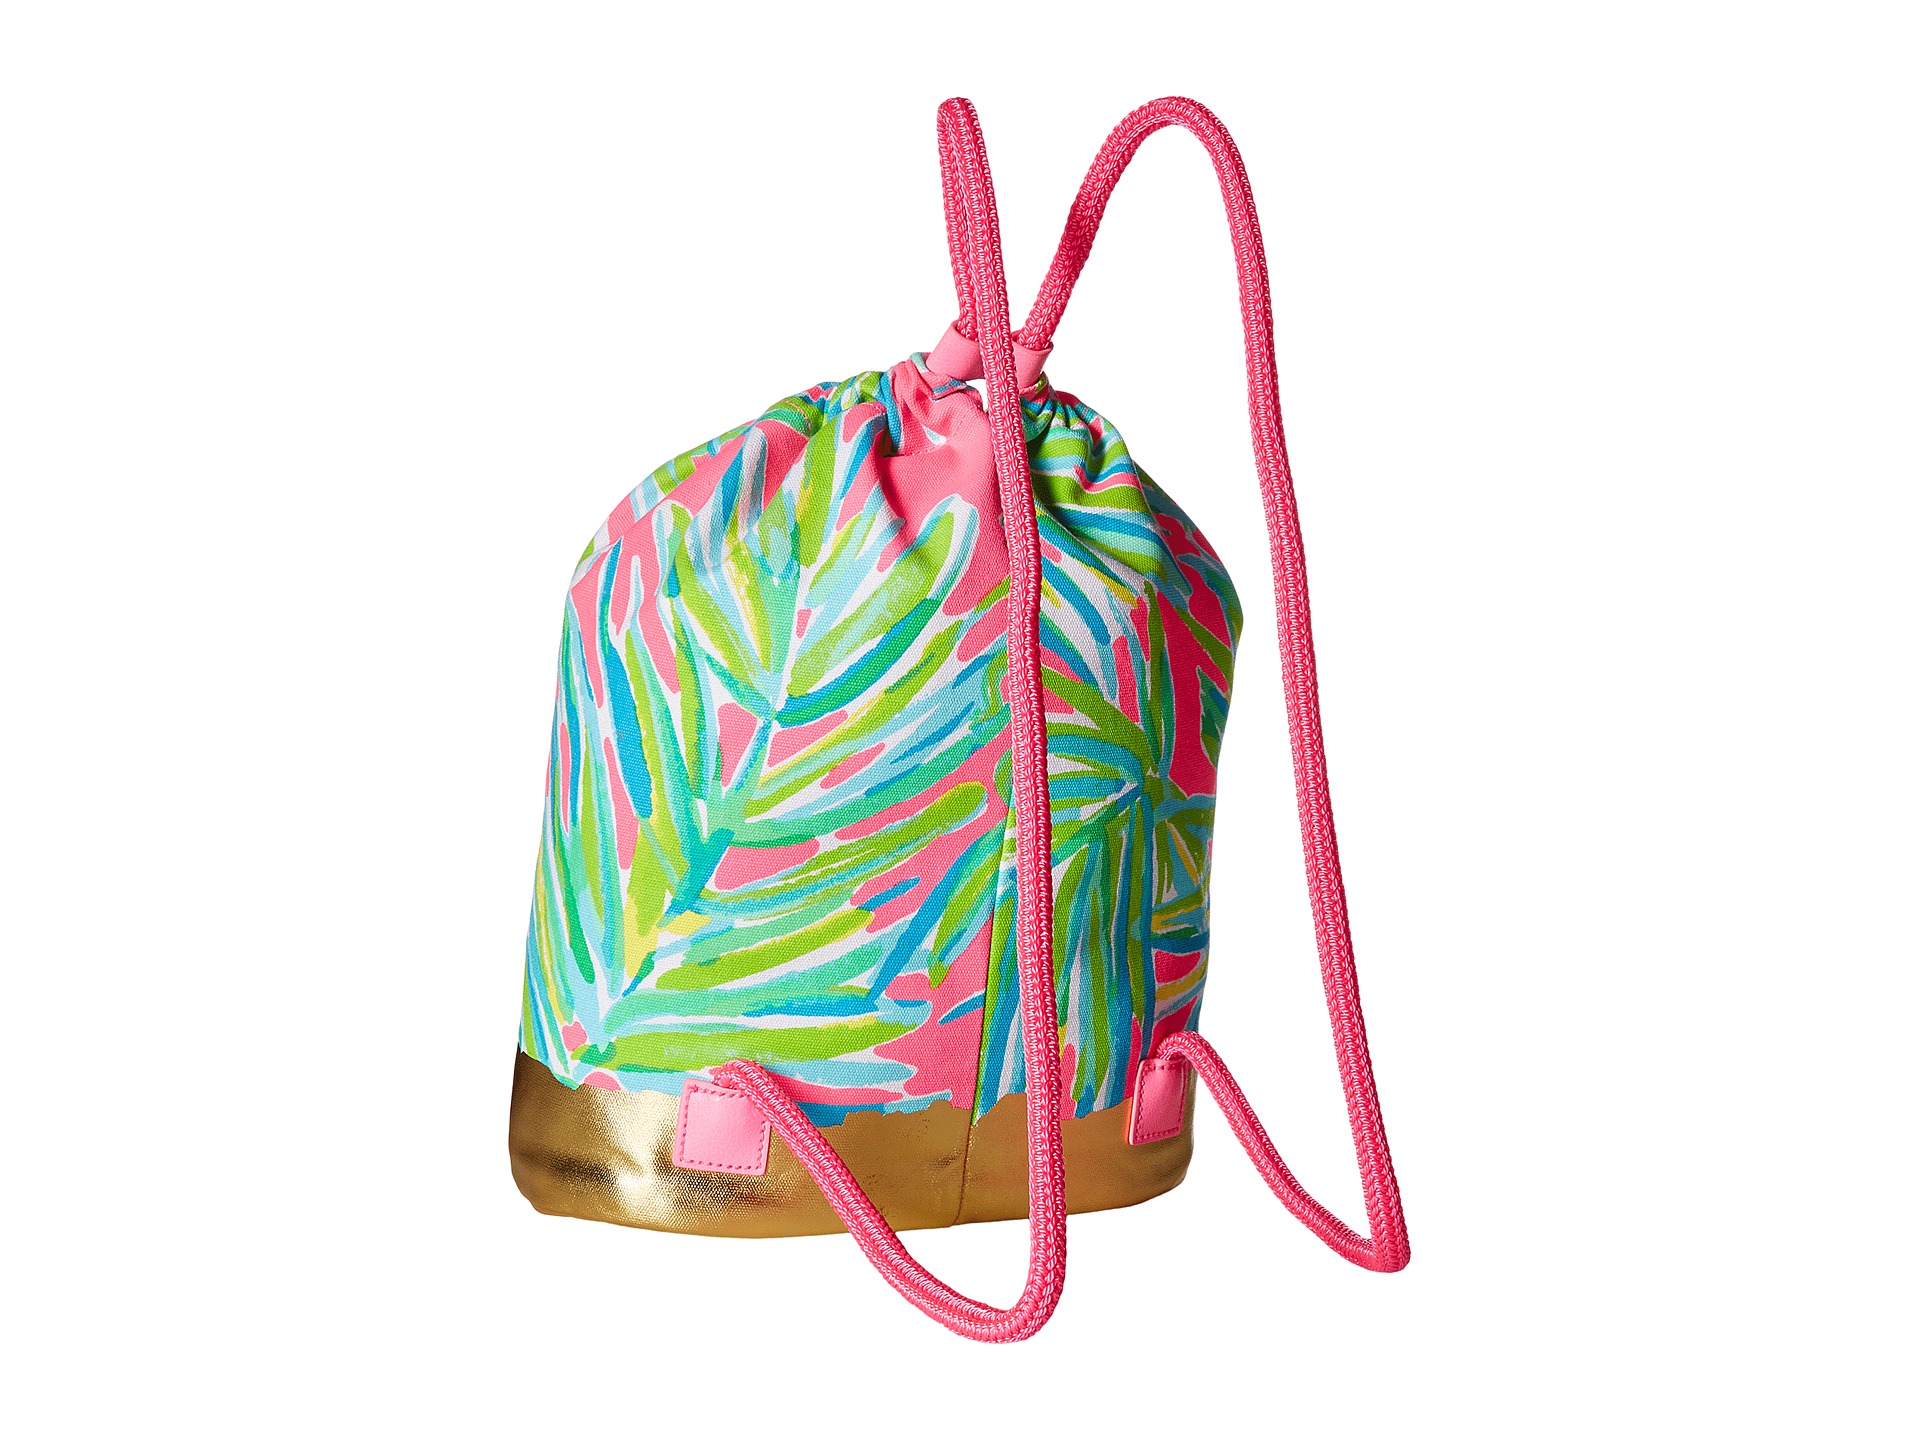 Lilly Pulitzer Beach Backpack - Zappos.com Free Shipping BOTH Ways